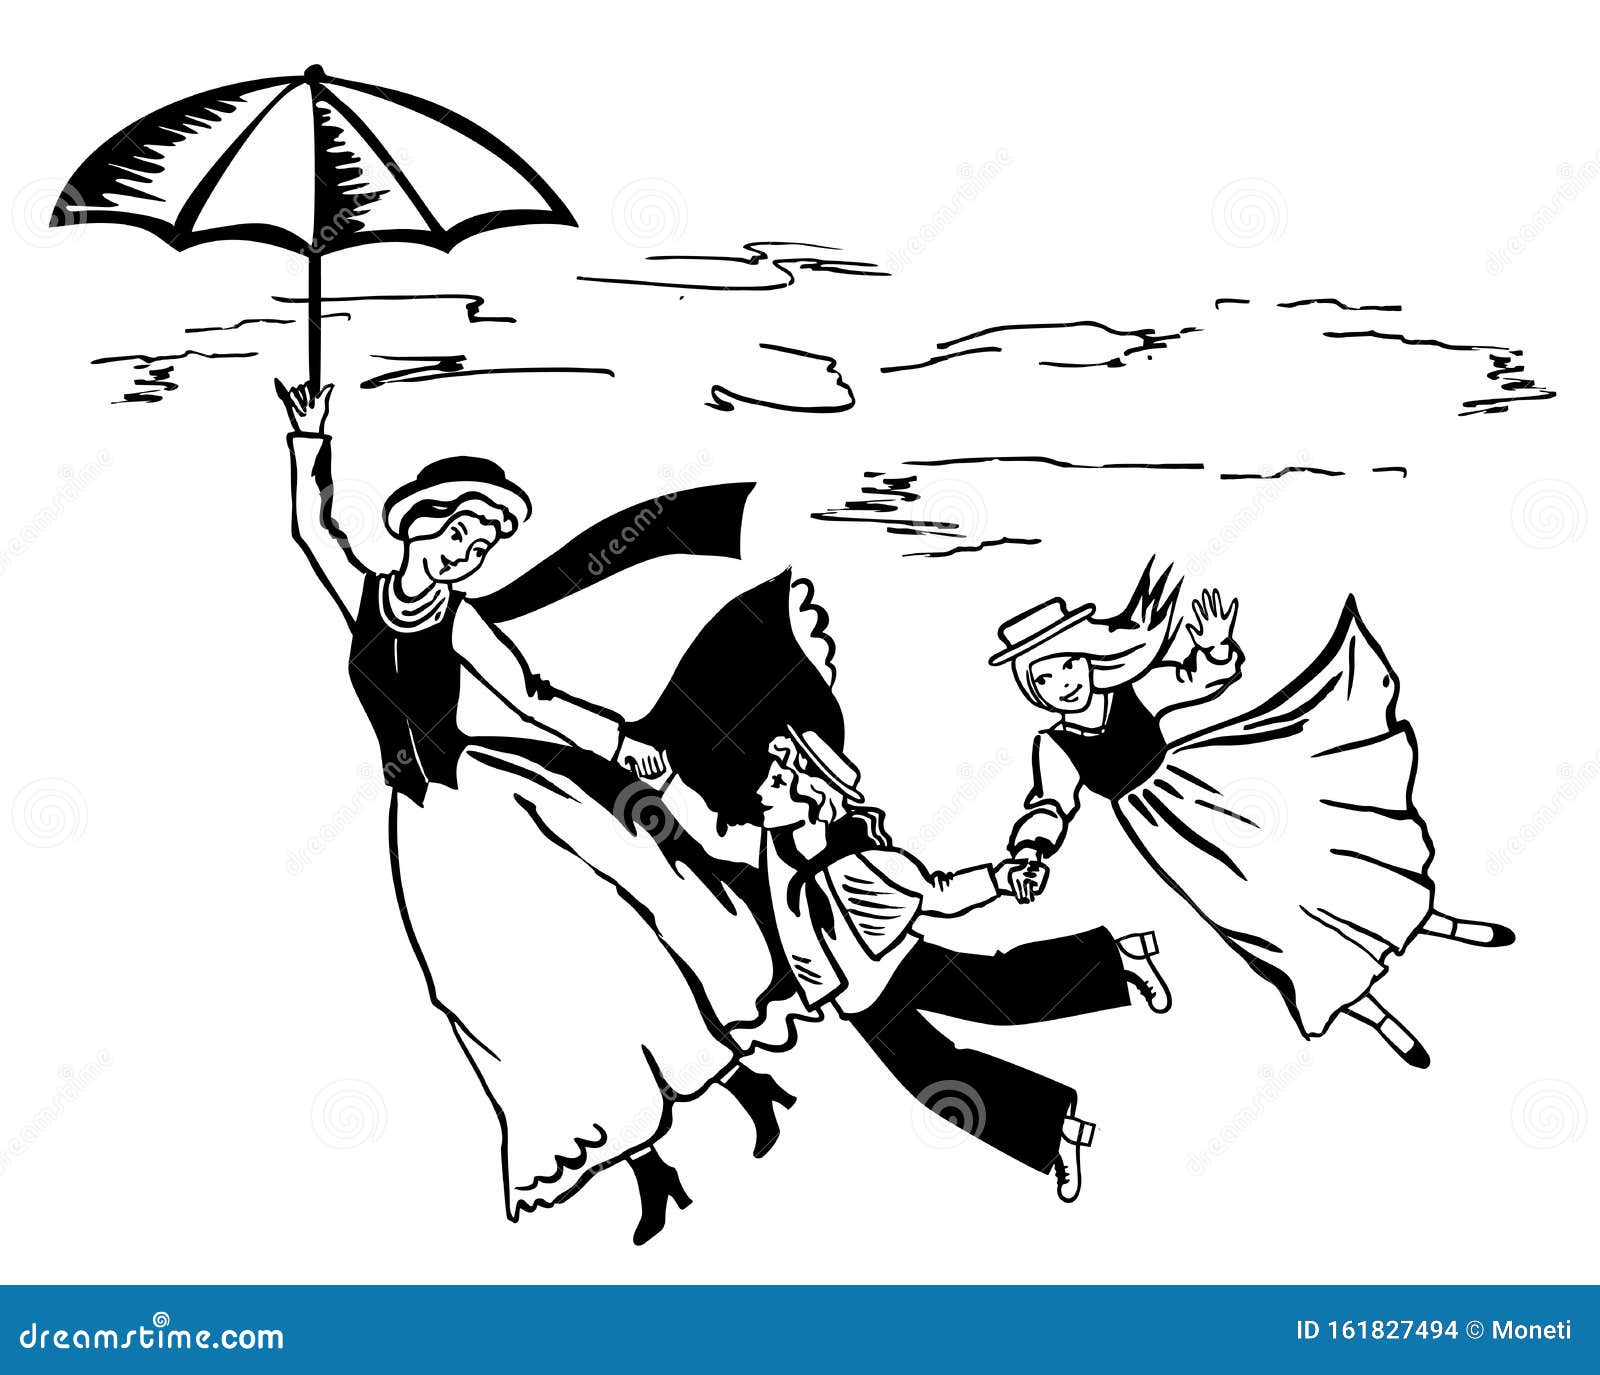 Mary Poppins Animation Coloring Page  Free Printable Coloring Pages for  Kids